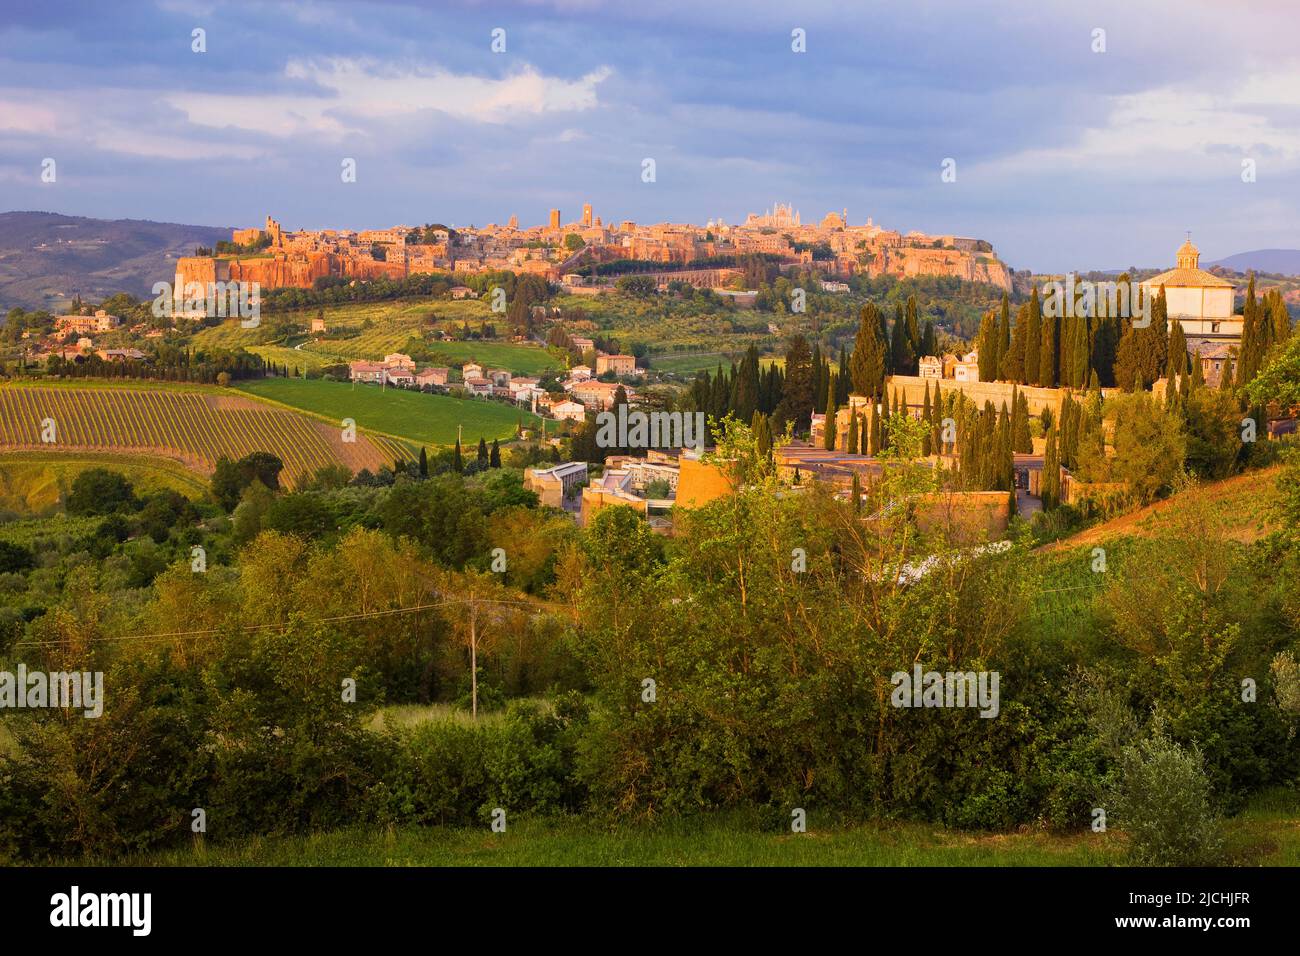 View of the medieval hill town of Orvieto, Umbria, Italy Stock Photo